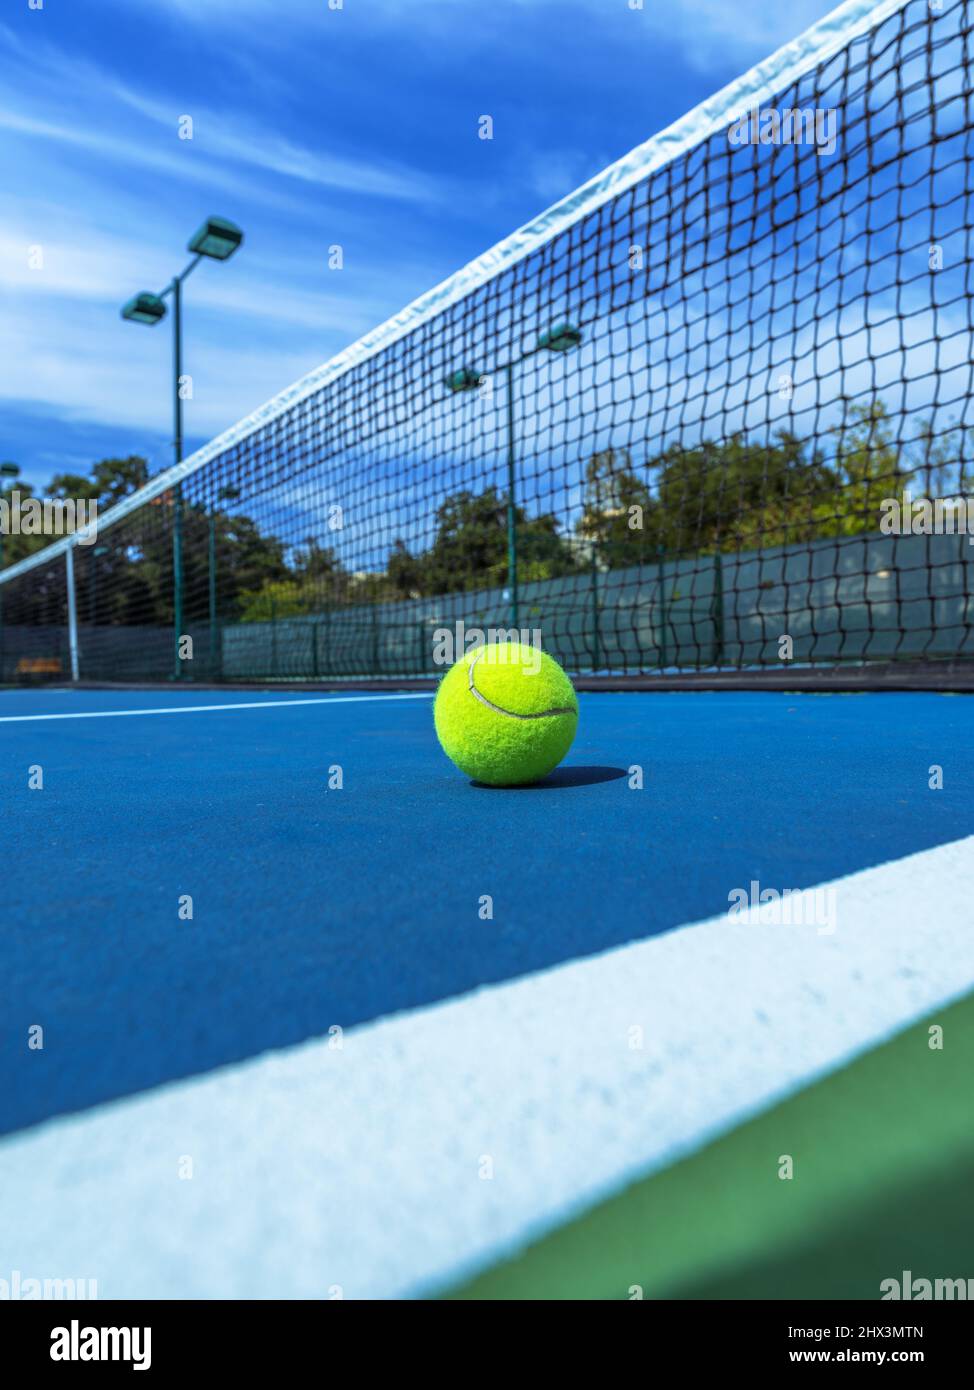 Yellow tennis ball on blue court with black net. Stock Photo